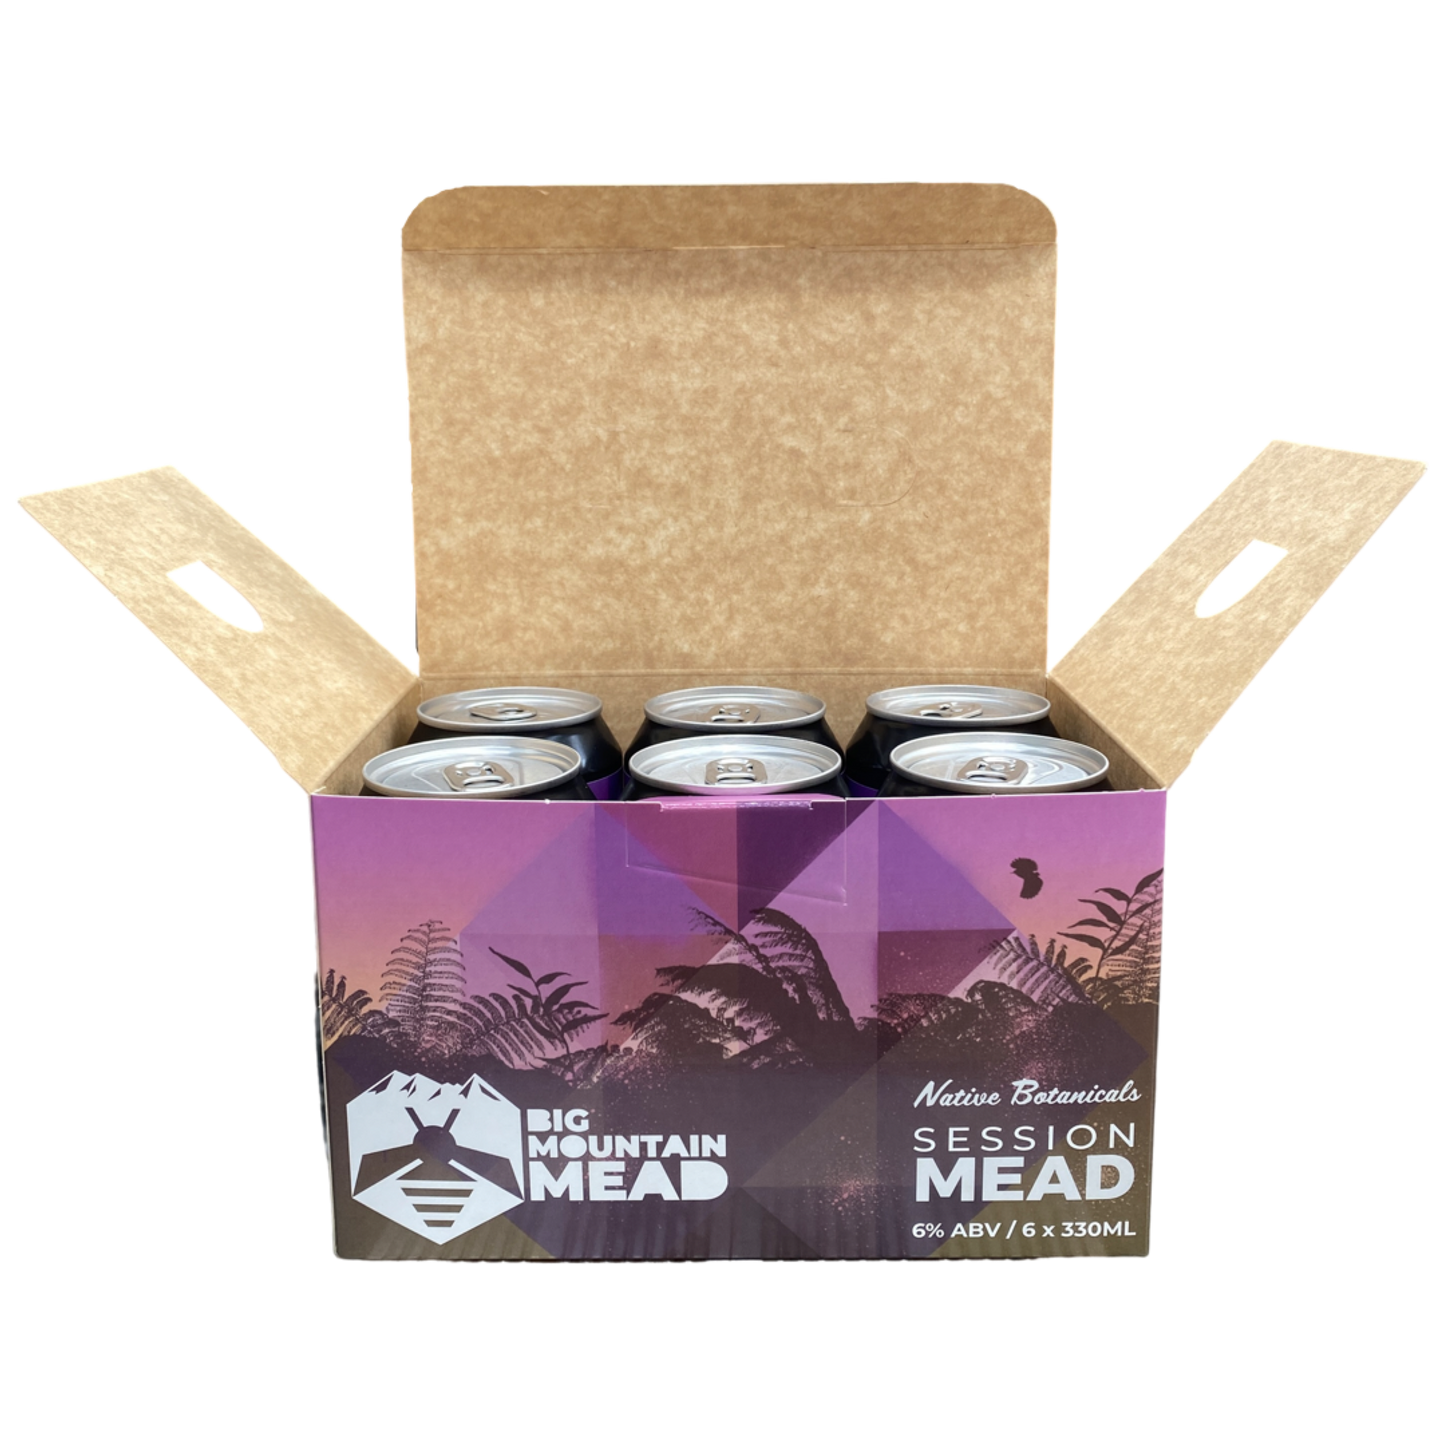 Native Botanicals Mead Retail 6-Pack 330ml cans - Big Mountain Mead